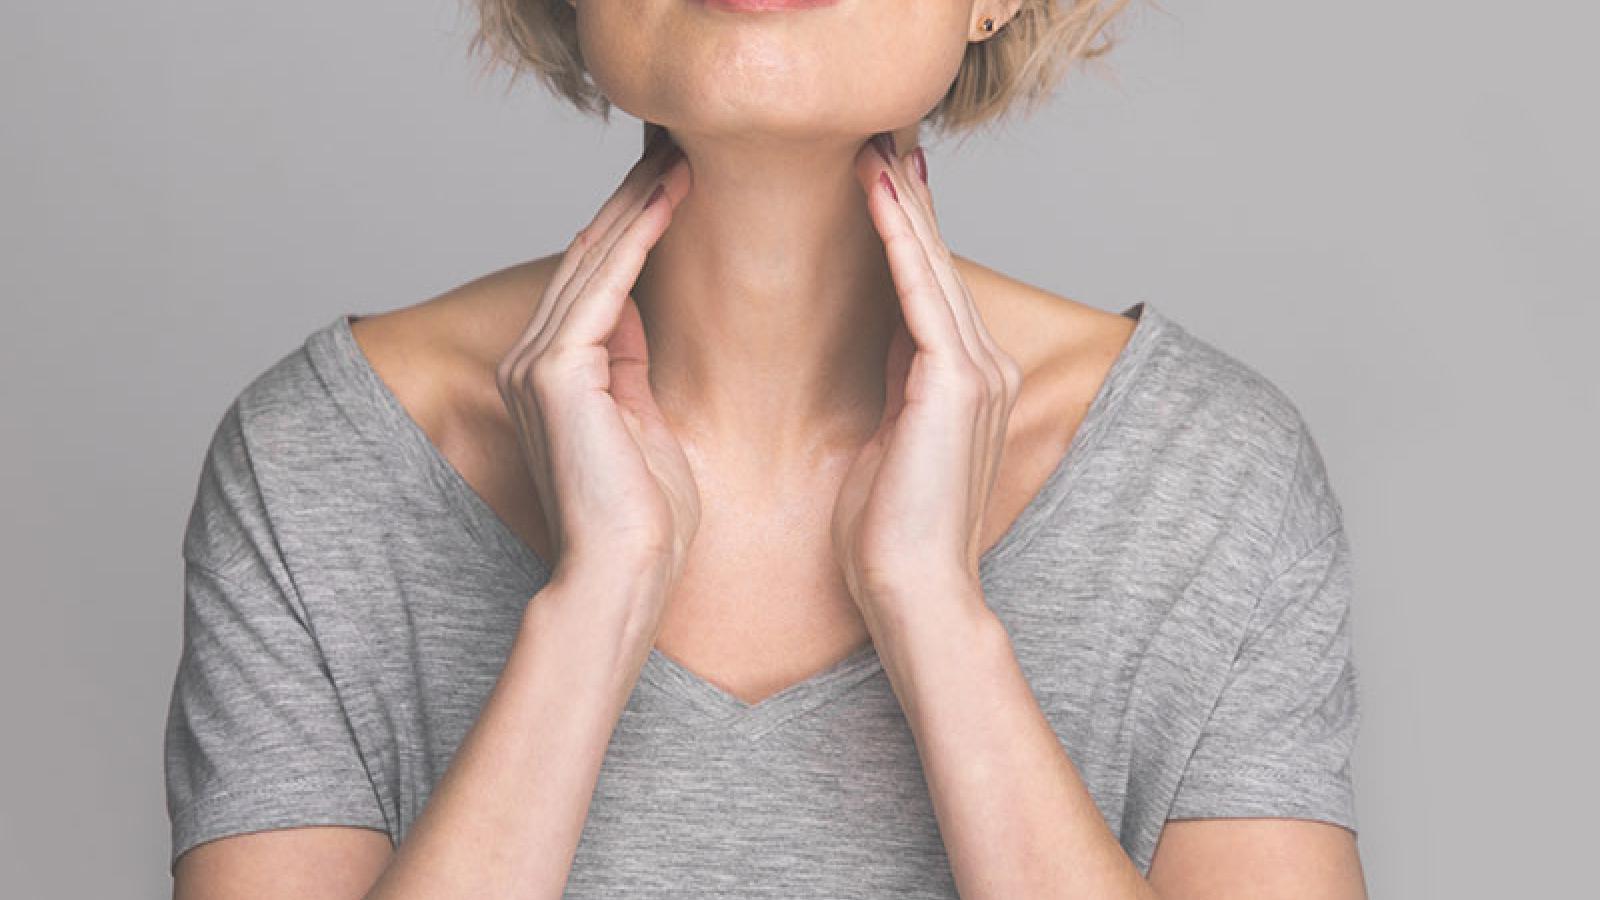 Common Signs of Thyroid Problems